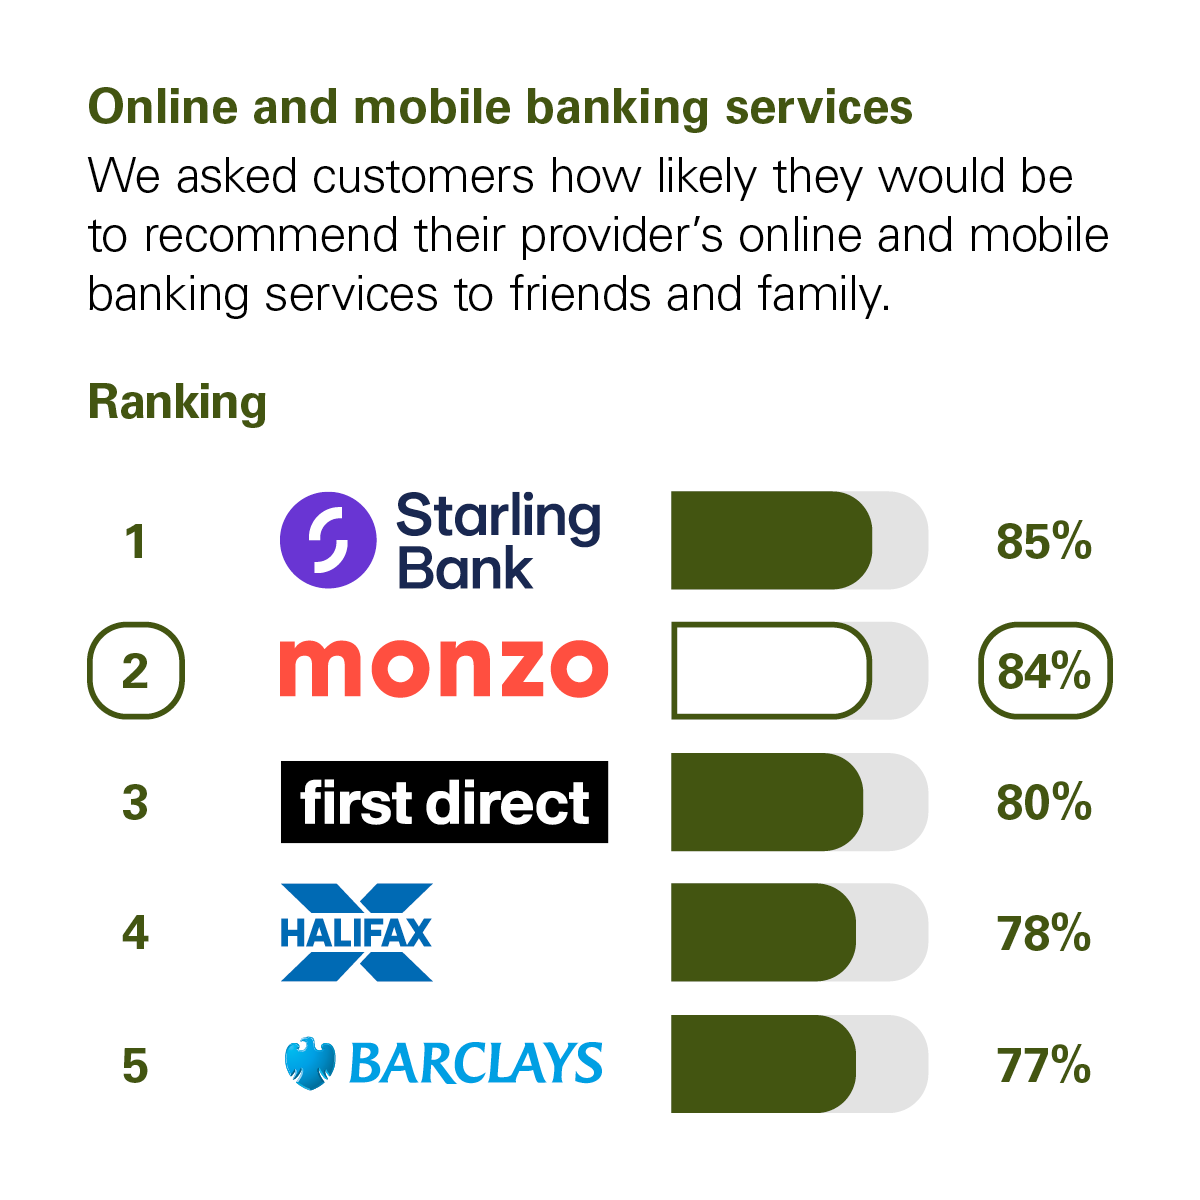 Graph showing the results of the CMA scoring of UK banks in the Online and Mobile Banking Services category. The CMA asked customers how likely they would be to recommend their provider's online and mobile banking services to friends and family. The rankings with percentage scores are: 1st Starling Bank with 85%. 2nd Monzo with 84%. 3rd First Direct with 80%. 4th Halifax with 78%. 5th Barclays with 77%.